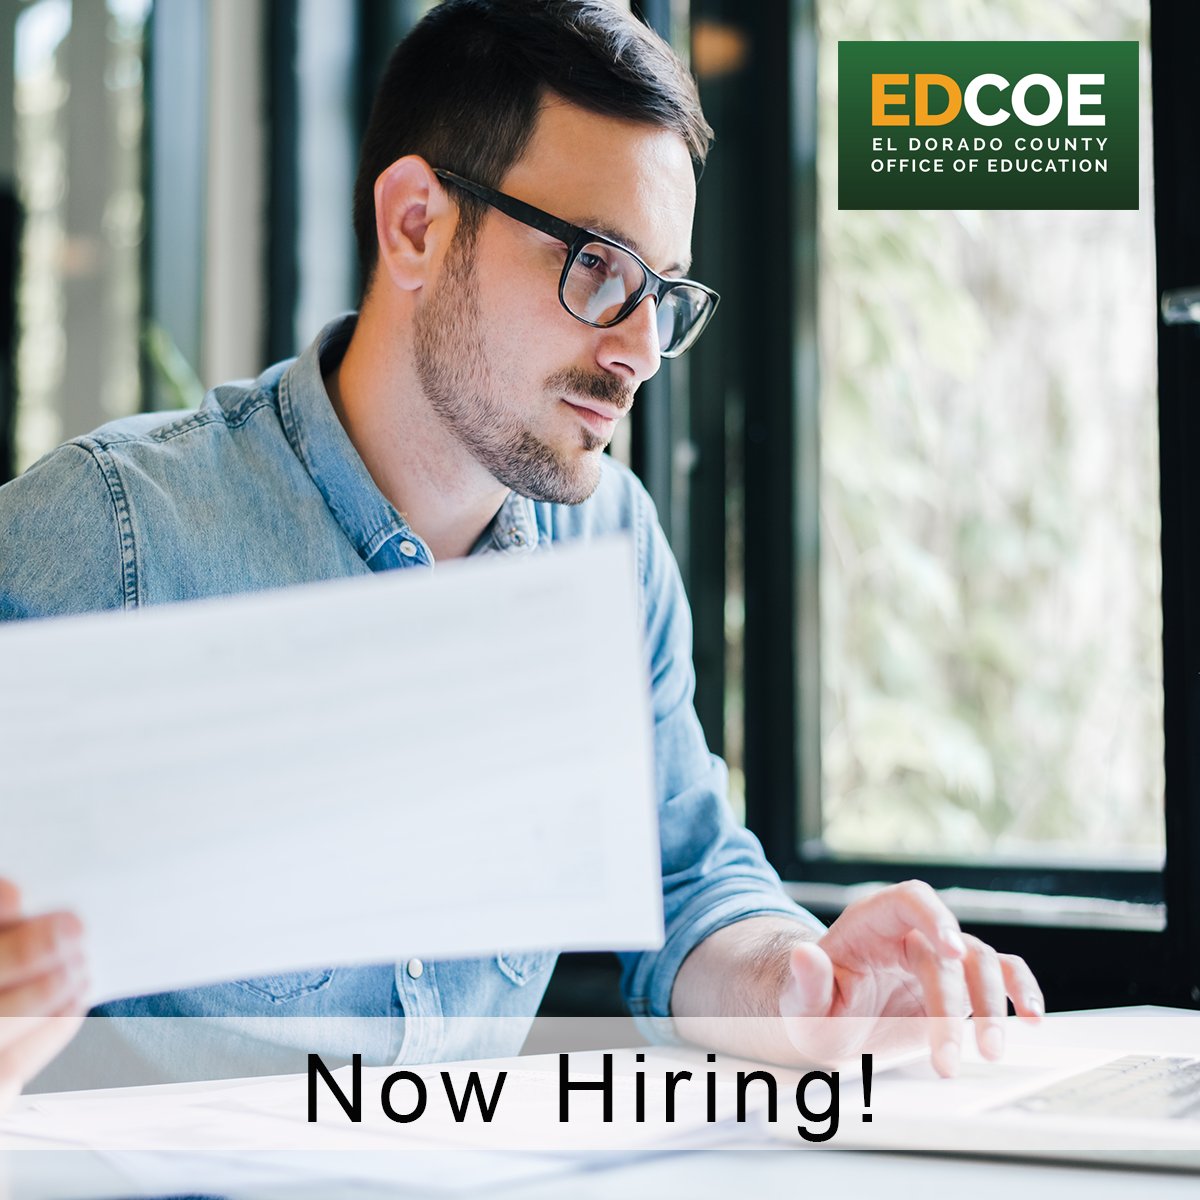 EDCOE is hiring a Communications Specialist! Starting at $5,916.00 monthly. Apply by 12:00 p.m. on 5/15/24 at edjoin.org/Home/JobPostin… EOE/SP4110